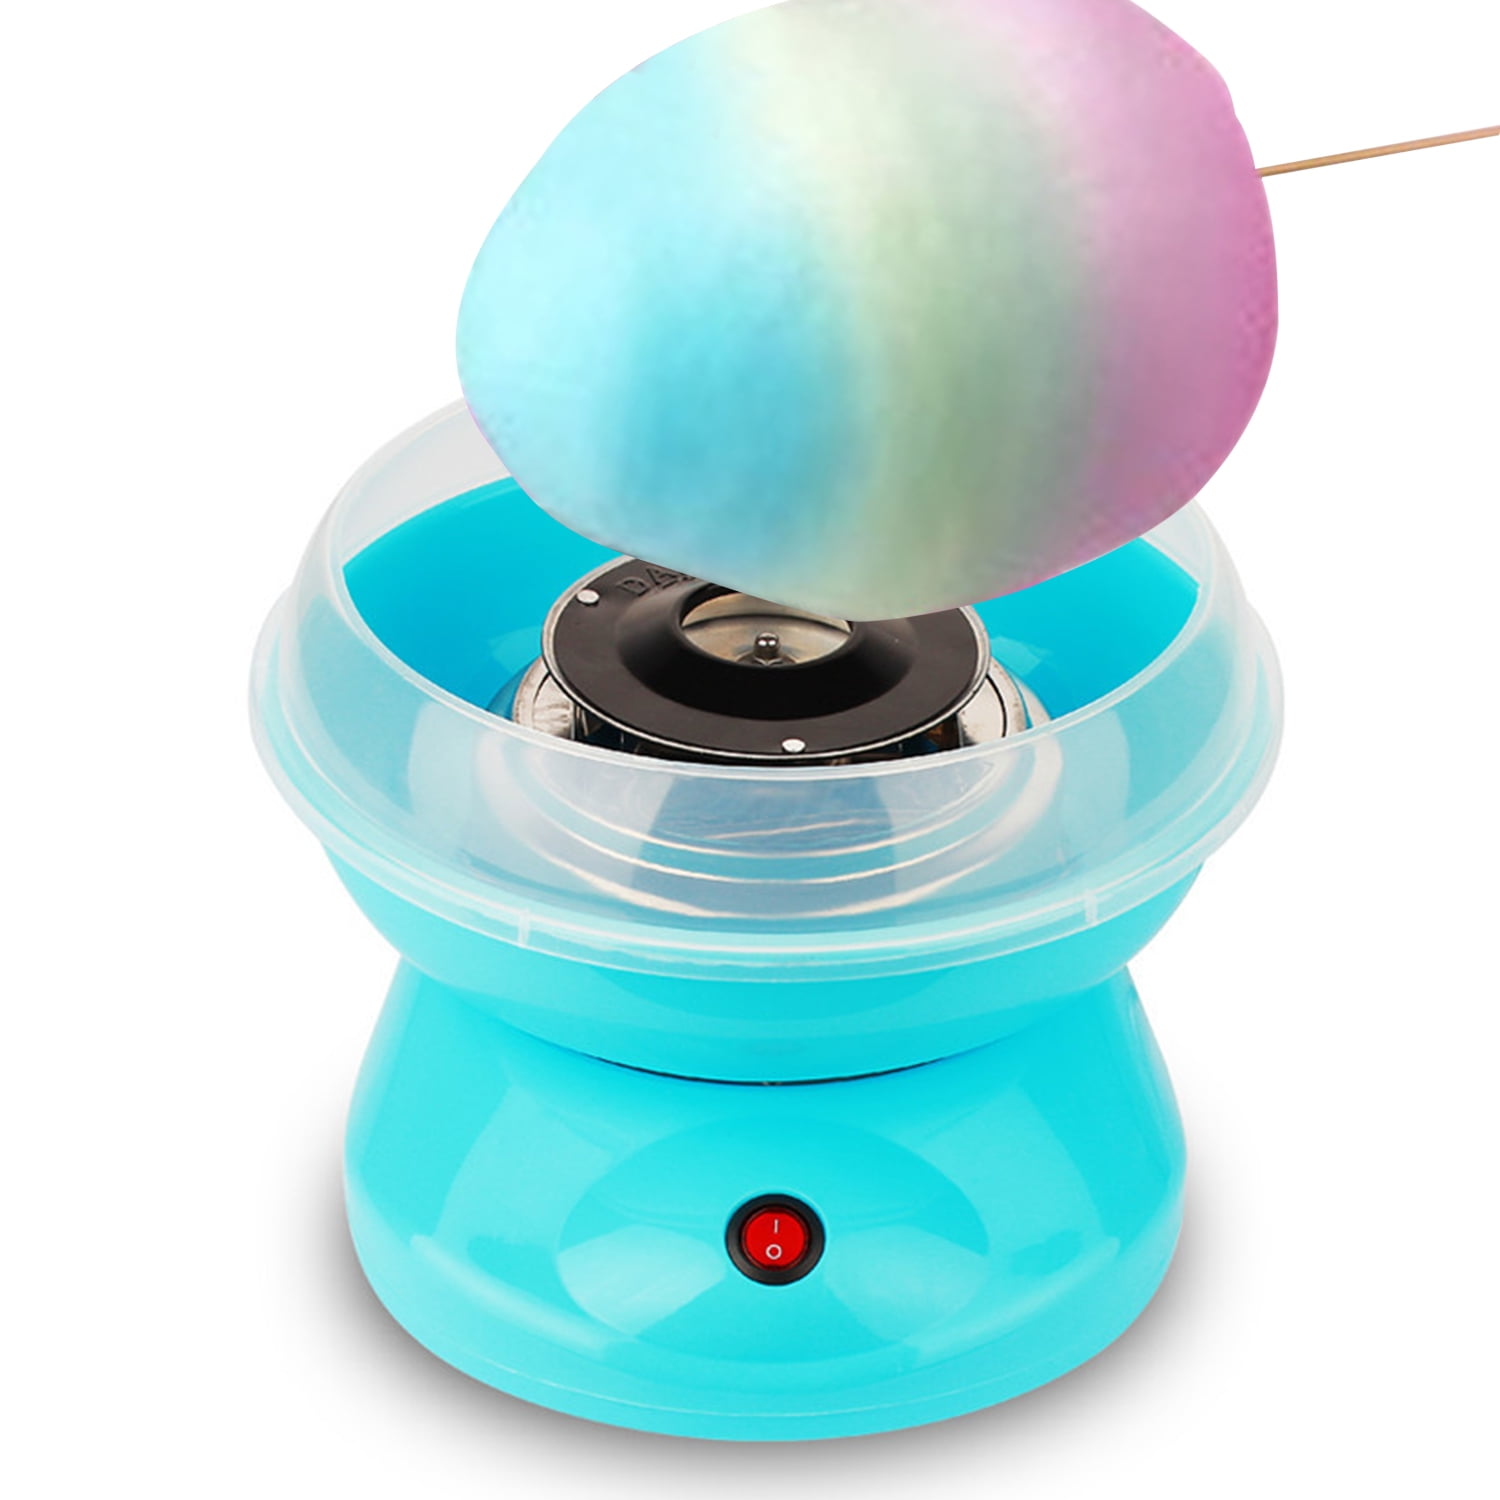 Mini Candy Floss Maker 450W for Kid Toys,Blue Retro Electric Cotton Candy Machine 